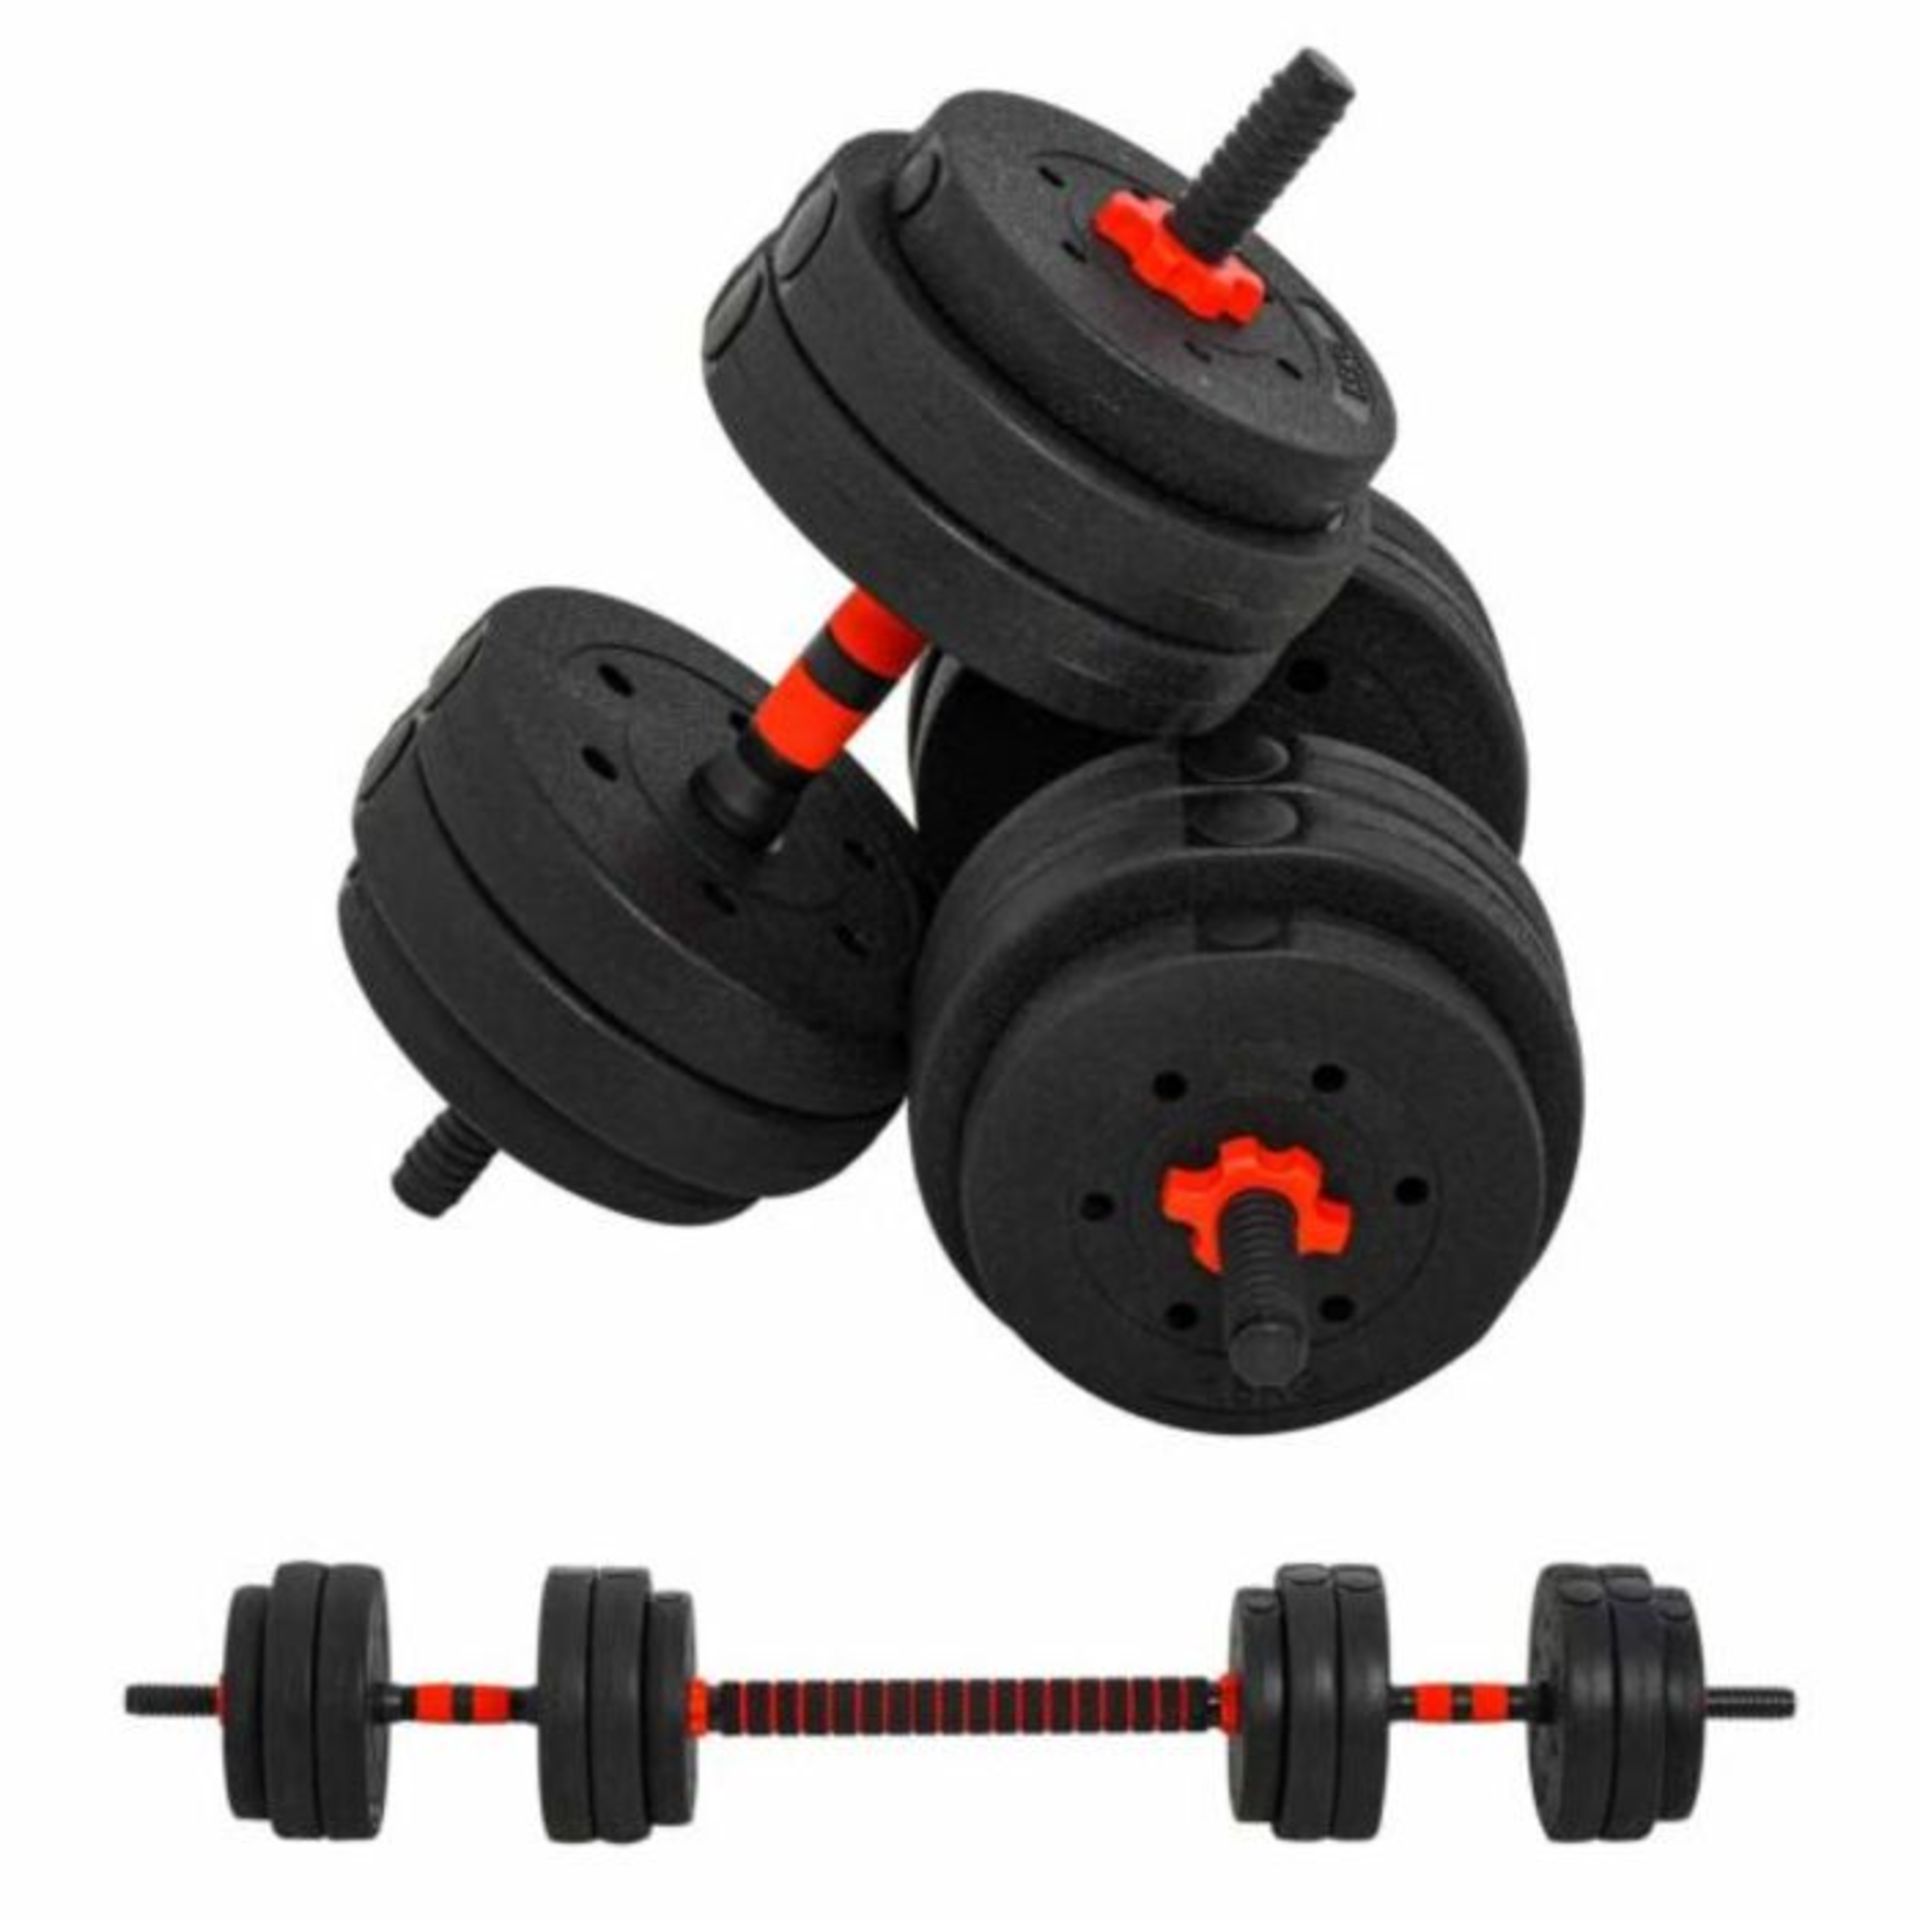 Hom Com 2 in1 Barbell/Dumb bell 20kg weight set, new and boxed, Similar sets retail at around ?40